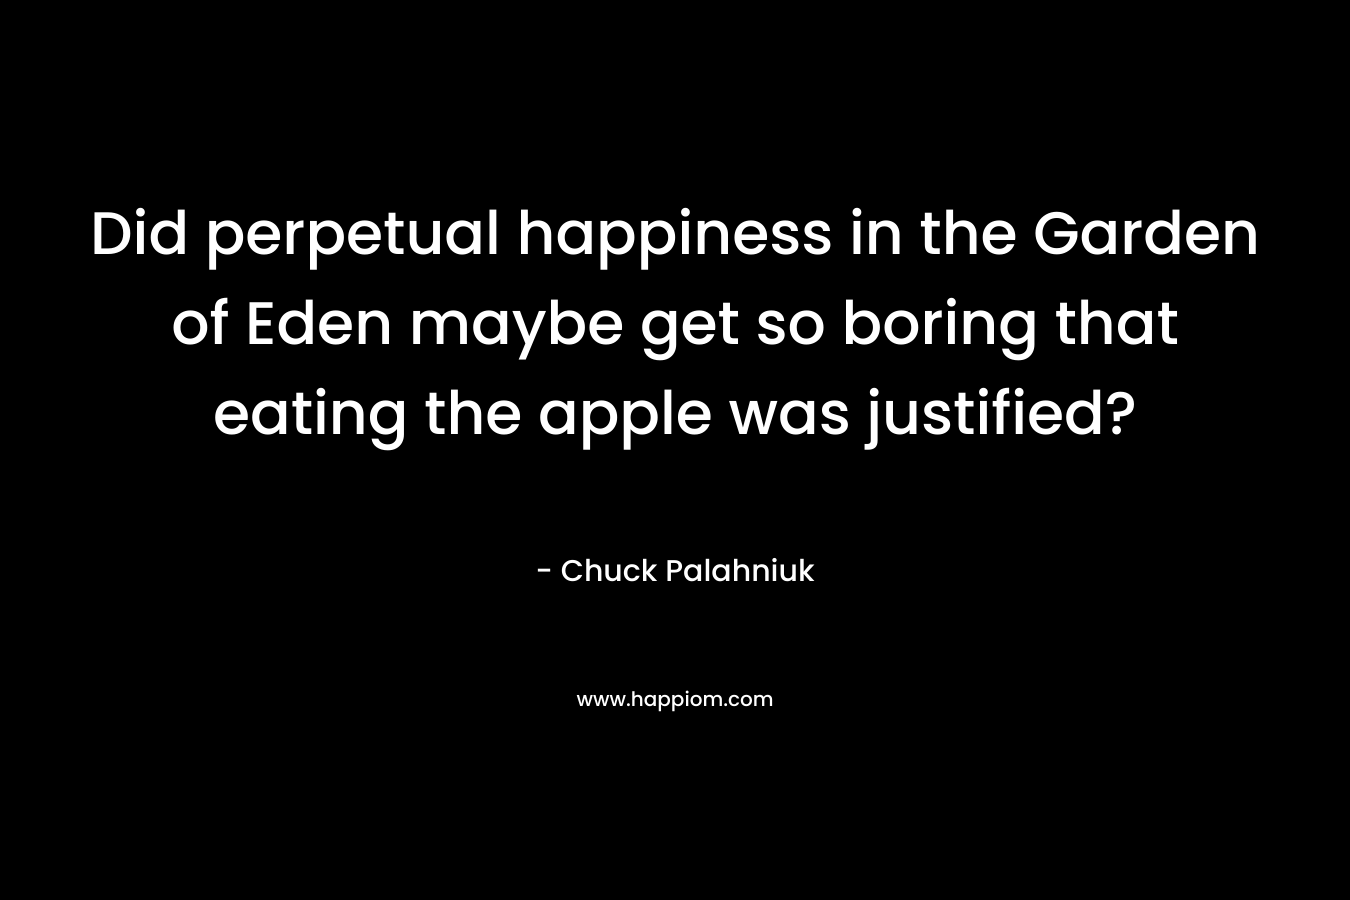 Did perpetual happiness in the Garden of Eden maybe get so boring that eating the apple was justified? – Chuck Palahniuk